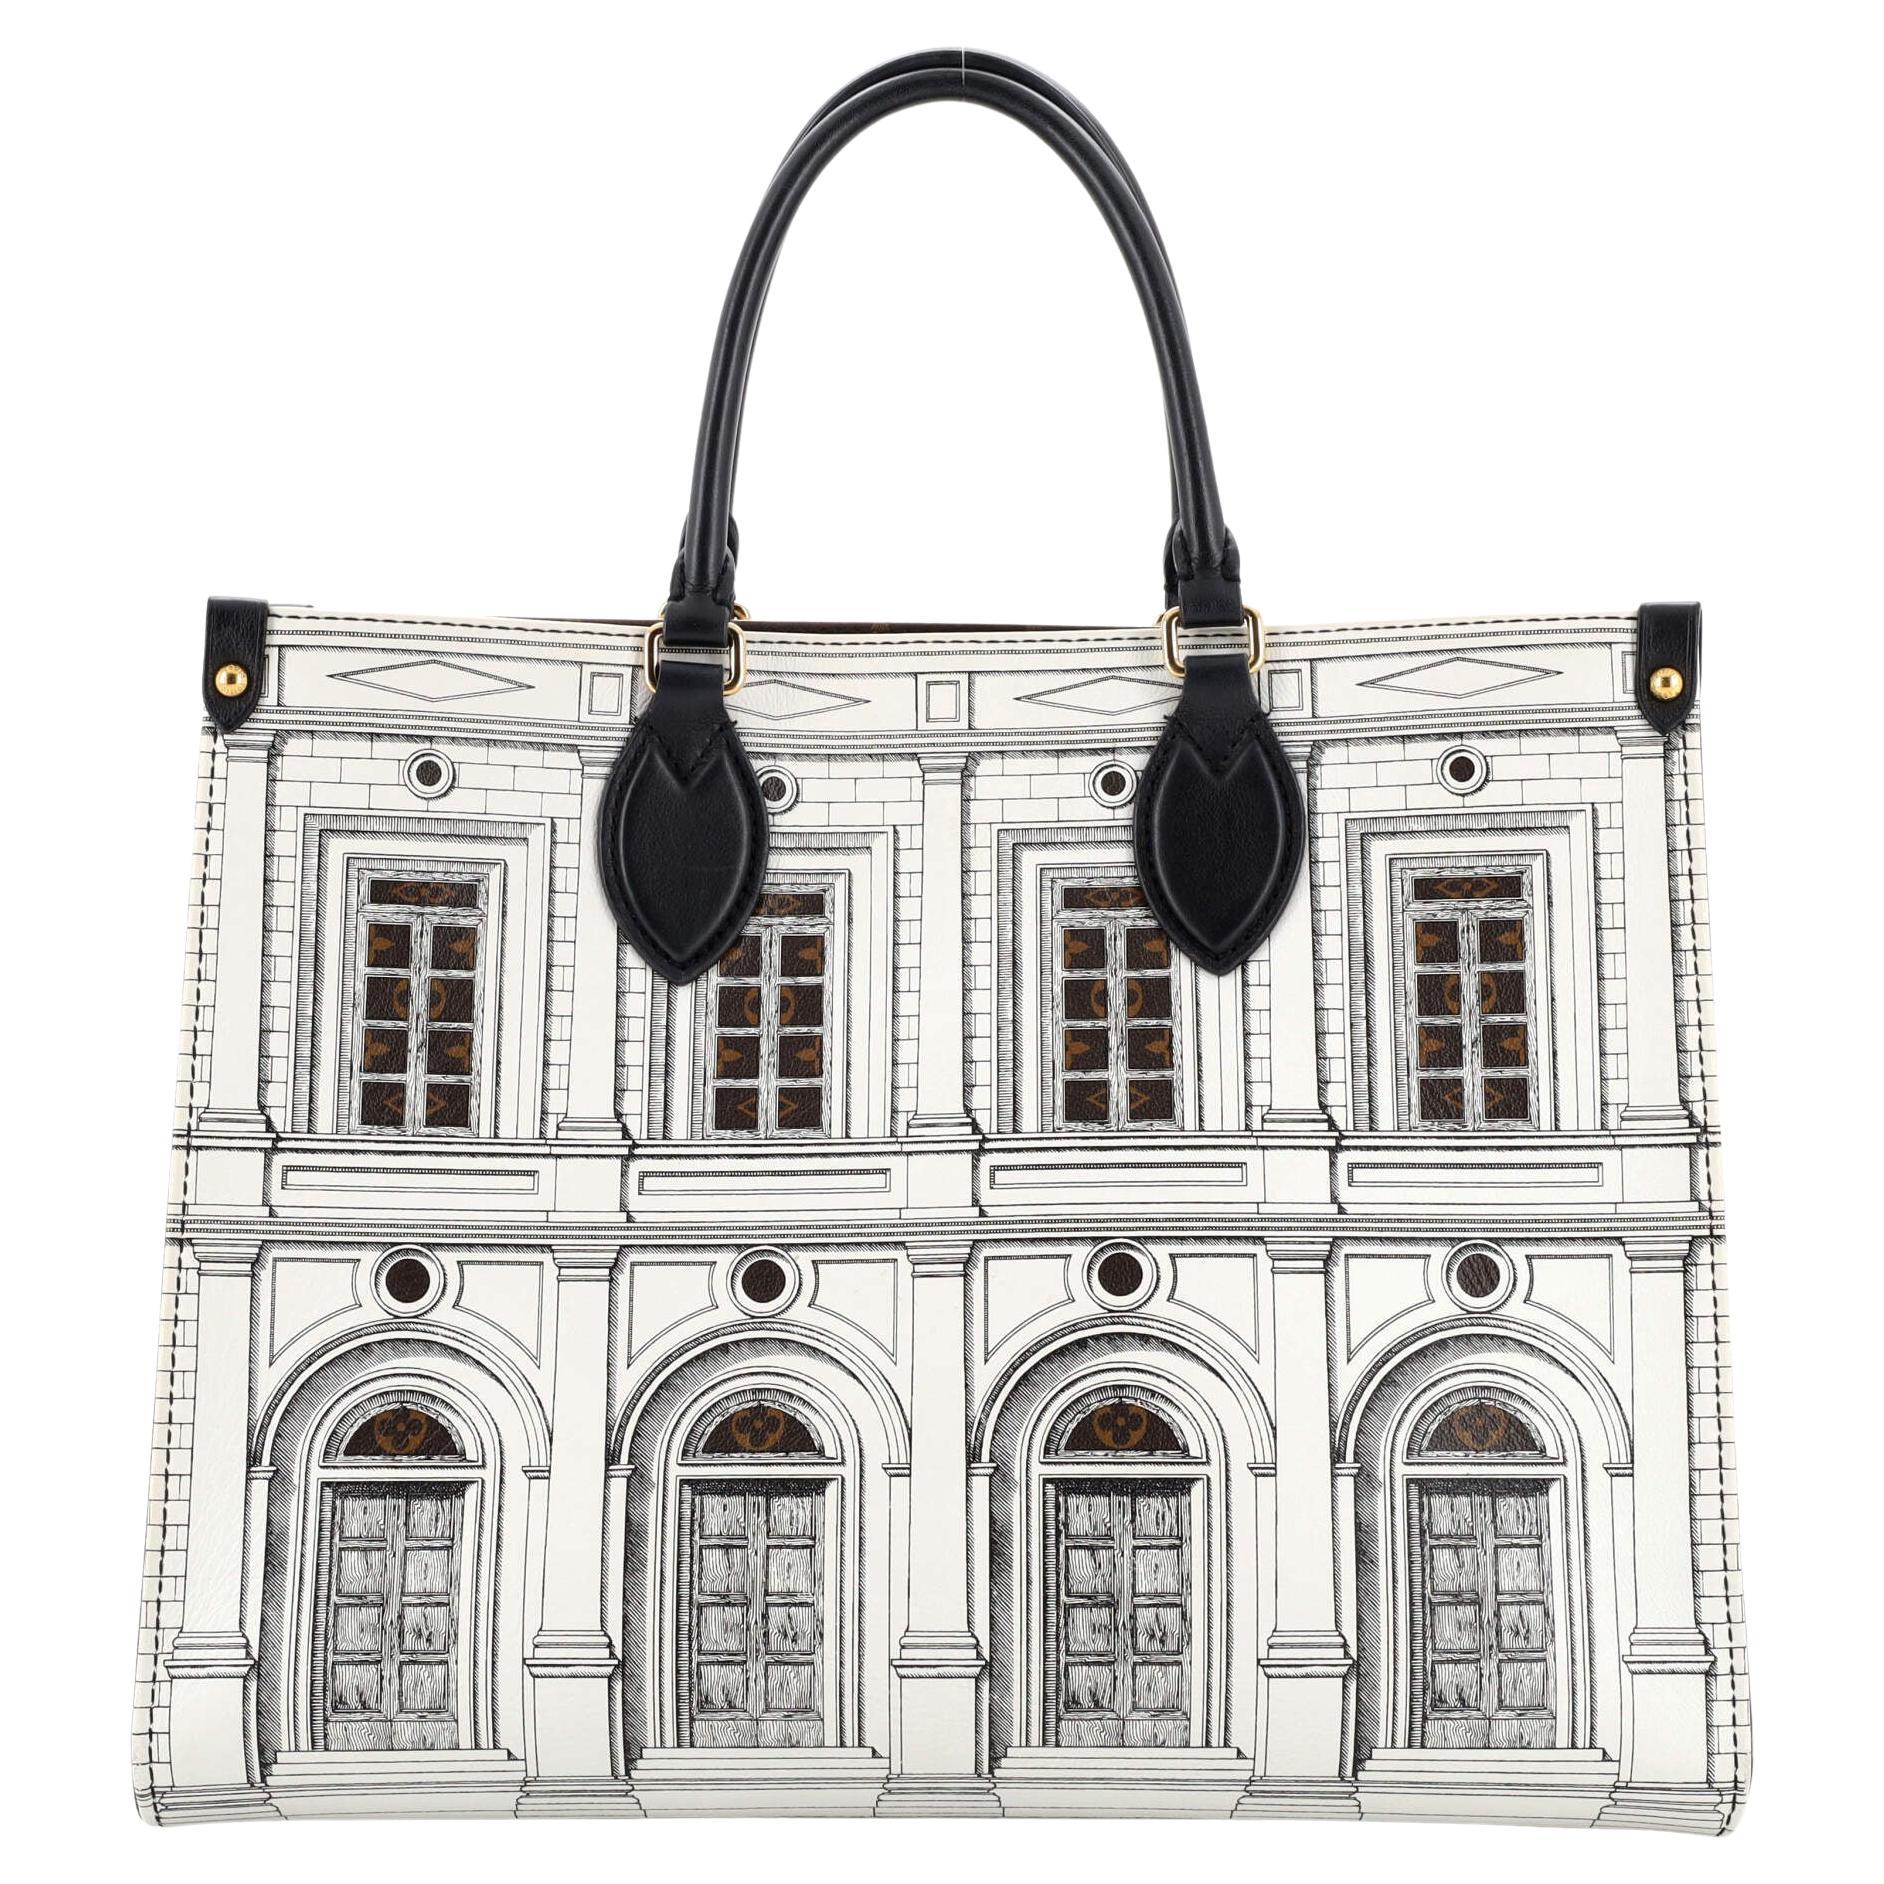 Louis Vuitton X Fornasetti - 5 For Sale on 1stDibs